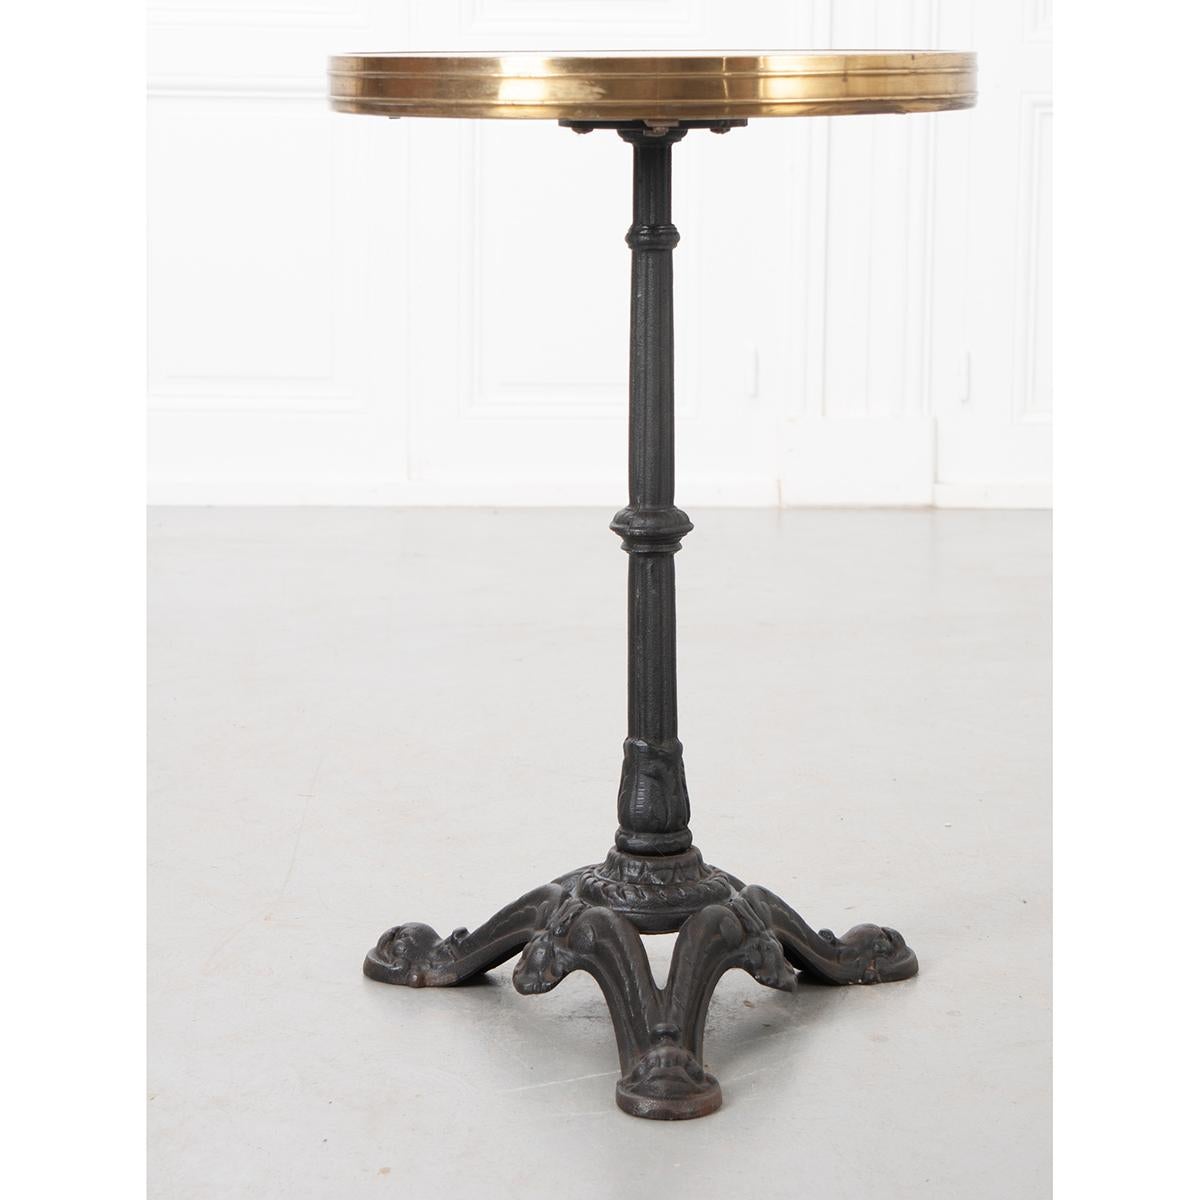 A classically styled French bistro table from the late 19th century. The table features a round white marble top that is encircled by a brilliantly-patinated wide brass band. The top is affixed to a cast iron tripodal pedestal base with feet